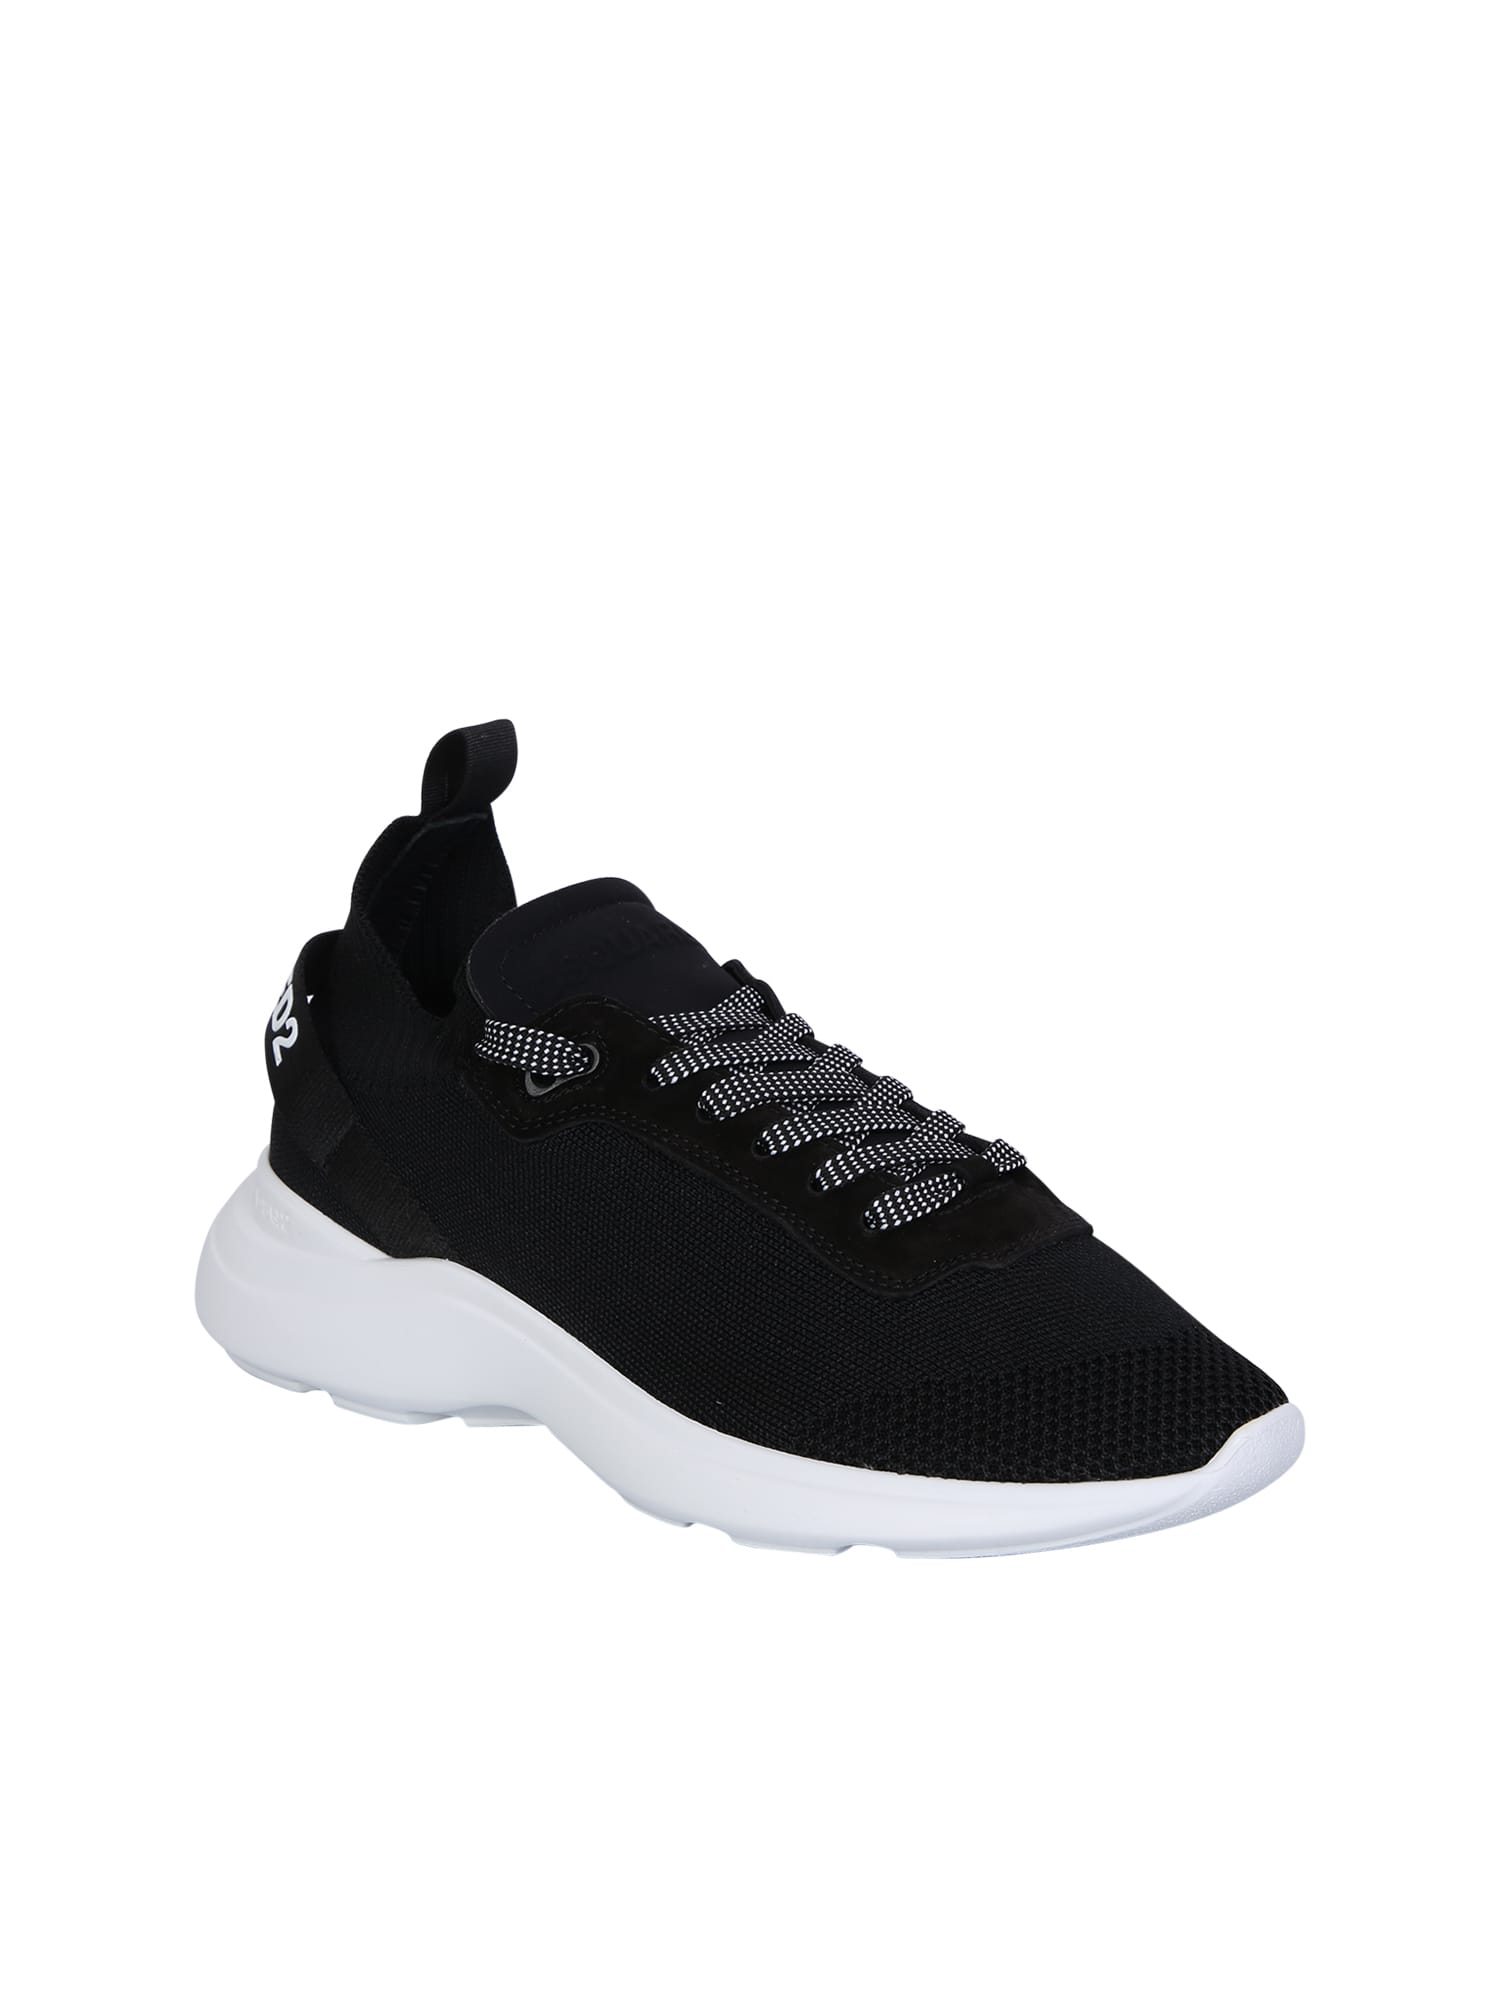 Shop Dsquared2 Black And White Fly Sneakers